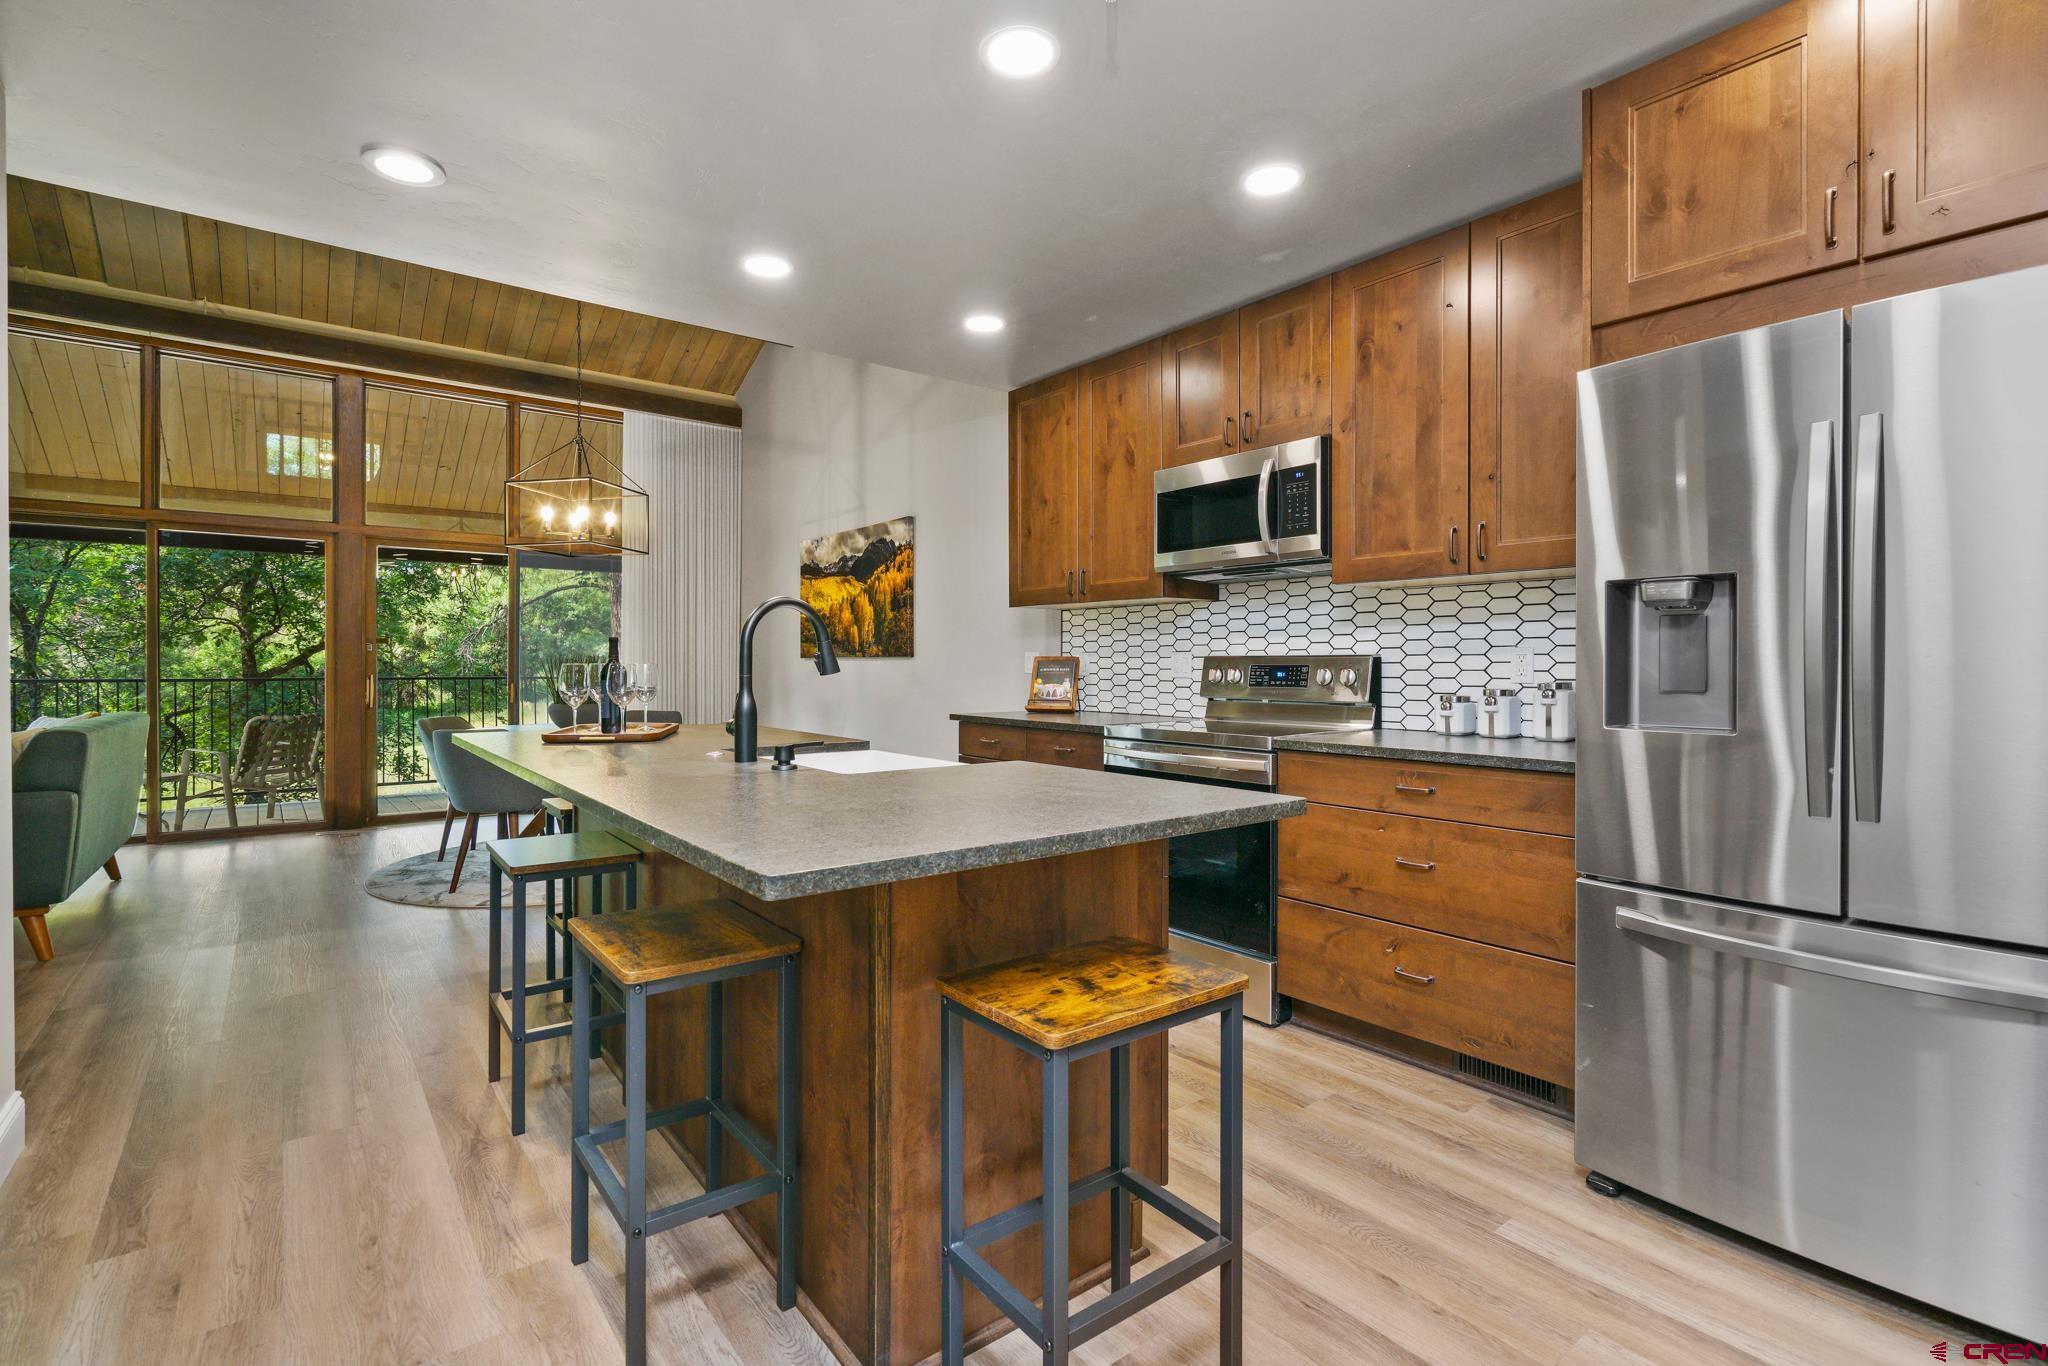 a kitchen with stainless steel appliances granite countertop a refrigerator a stove top oven a sink dishwasher and white cabinets with wooden floor